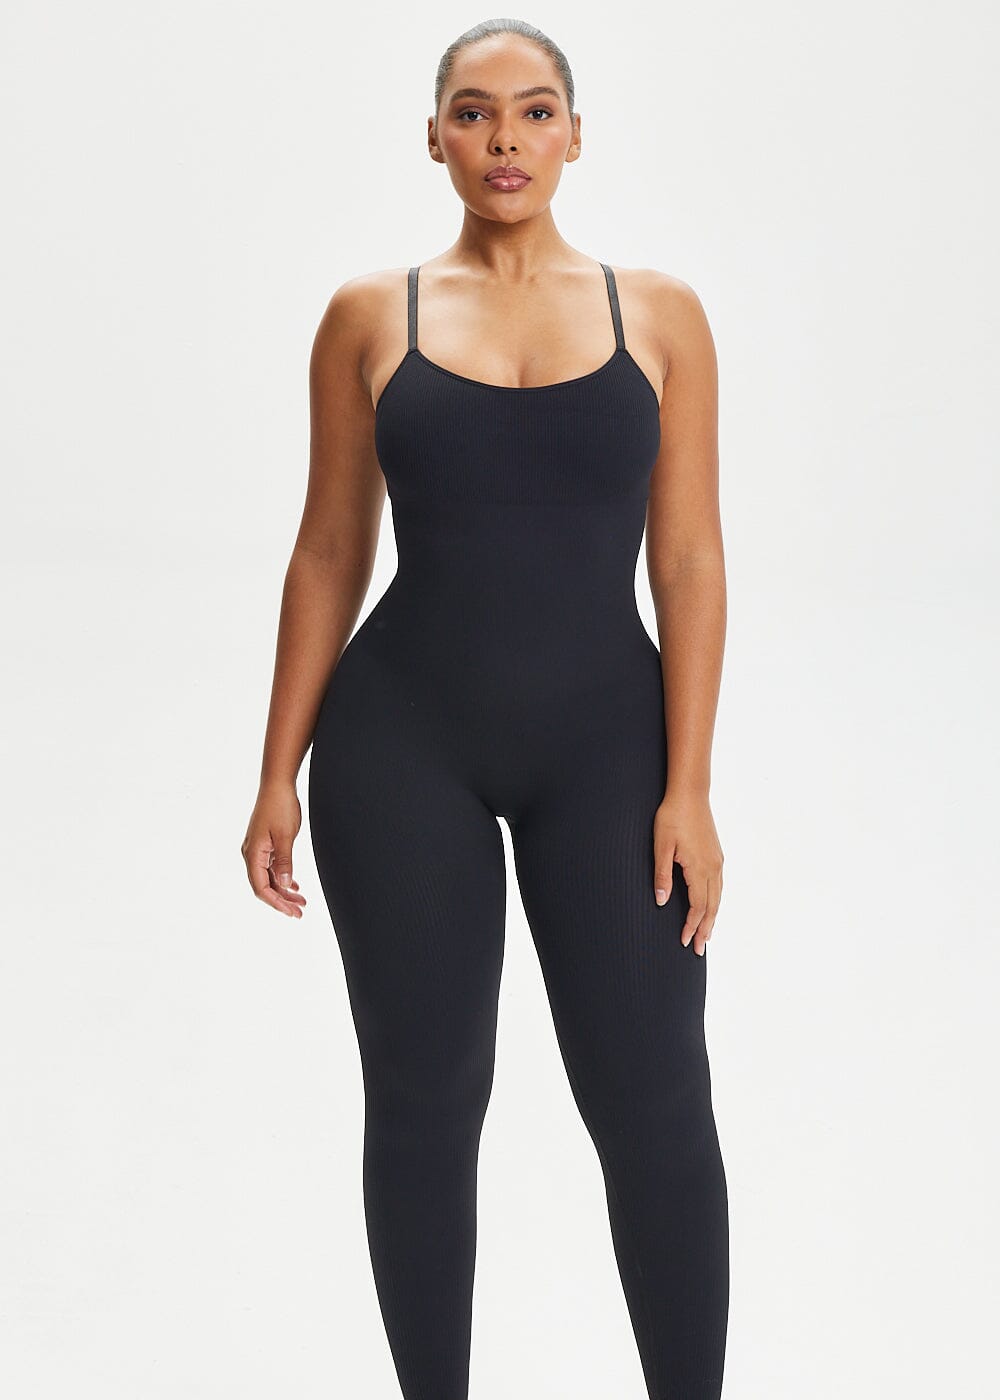 Maternity Black Snatched Rib Bump Support Leggings